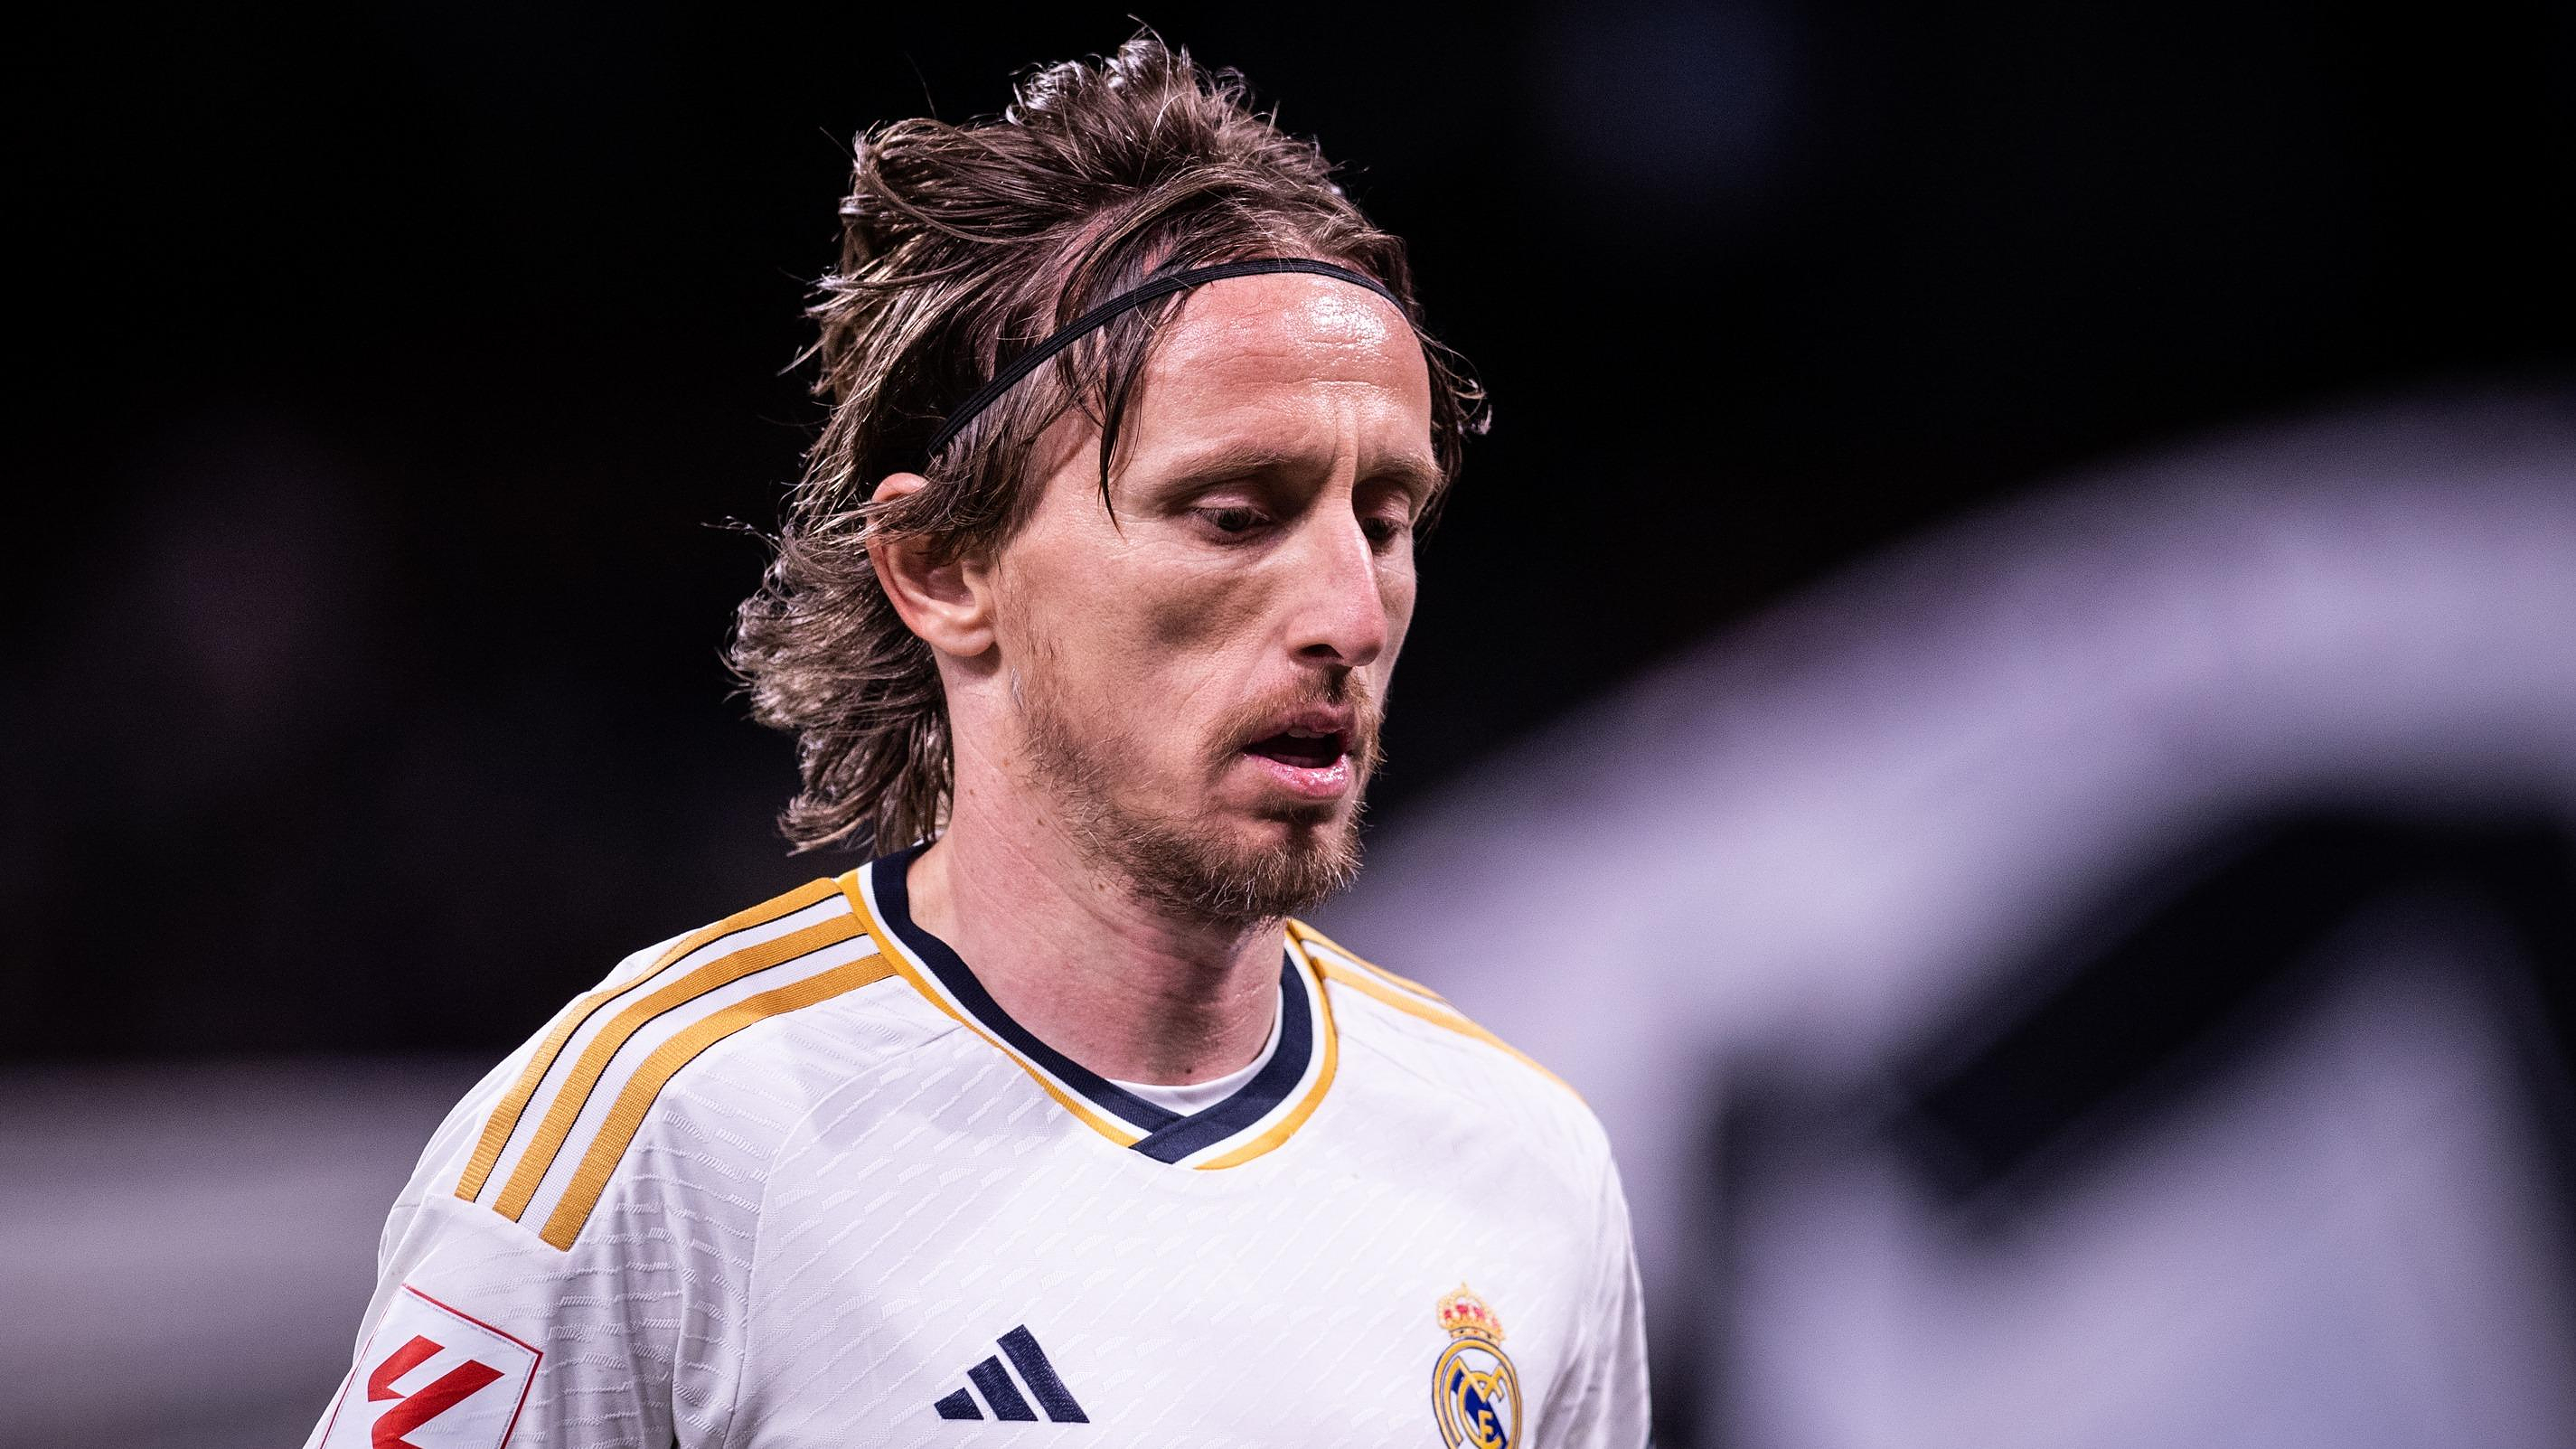 Mercato: Dinamo Zagreb dreams of a return of Modric and made it known in an original way